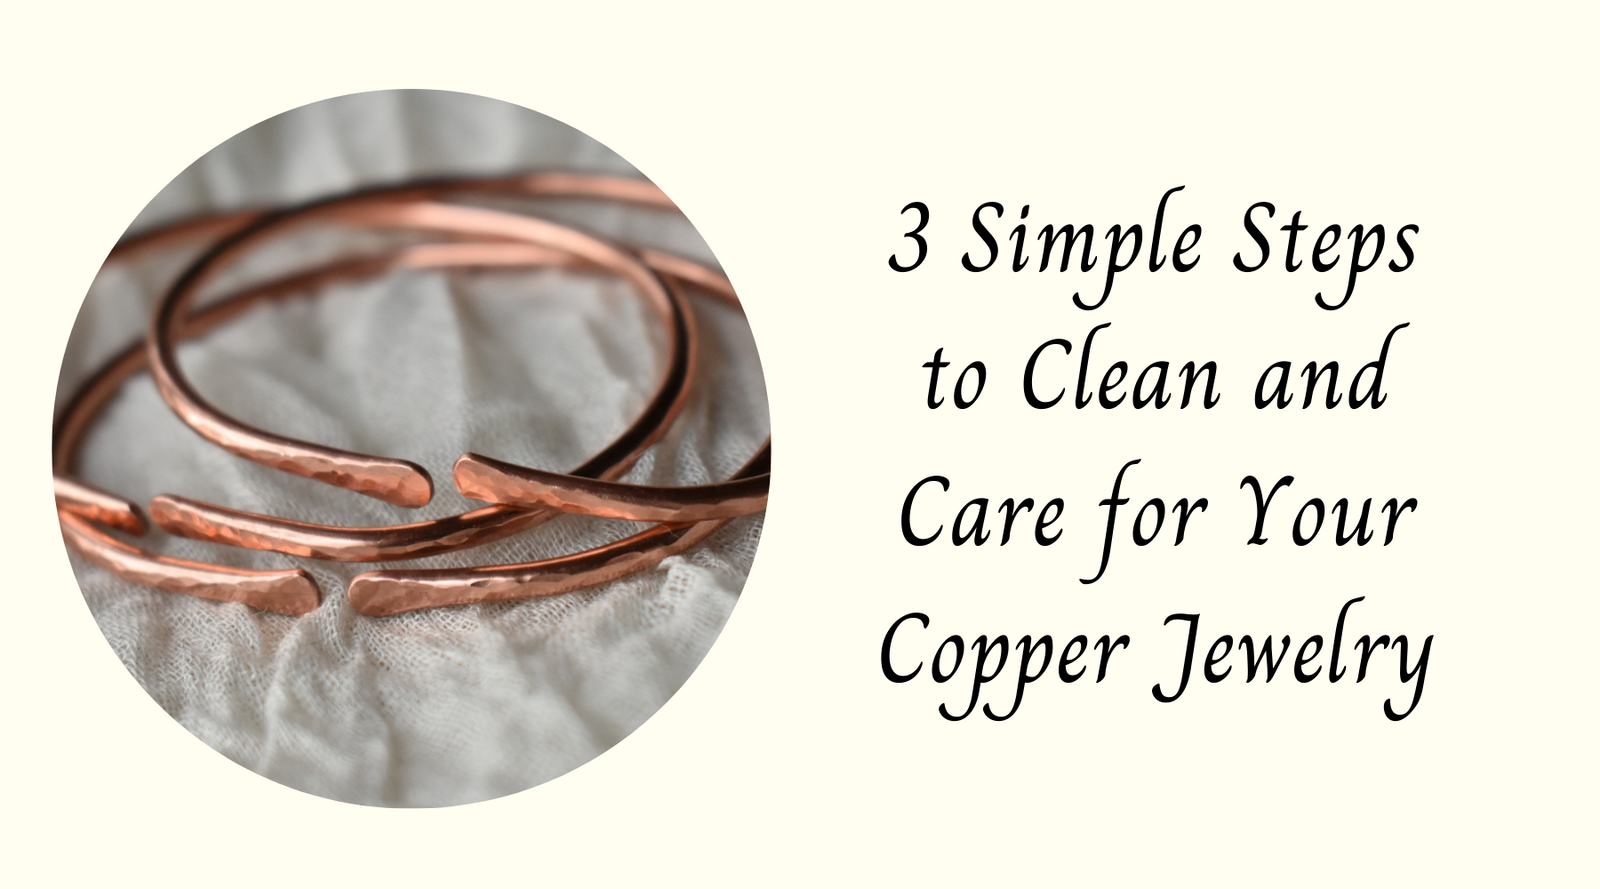 3 Simple Steps to Clean and Care for Your Copper Jewelry